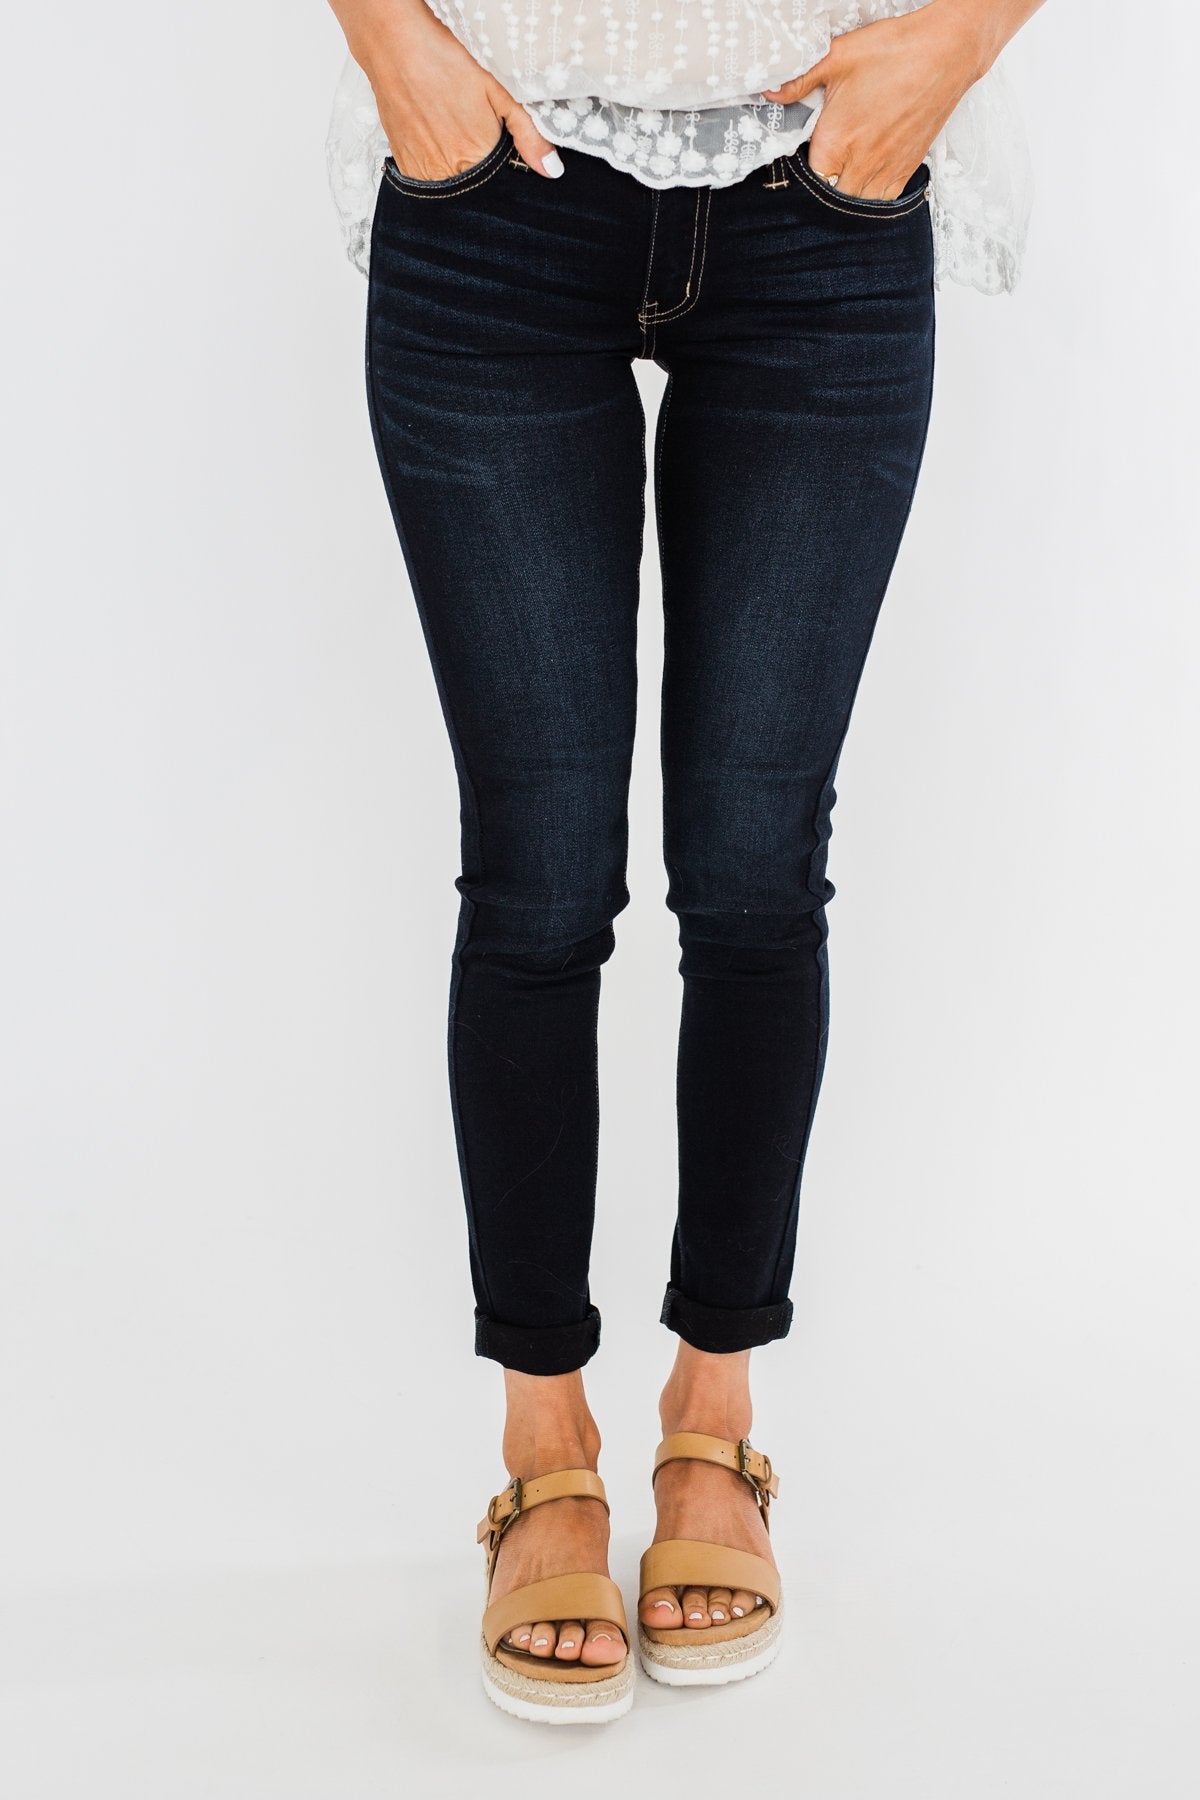 KanCan Skinny Jeans- Joanna Wash – The Pulse Boutique